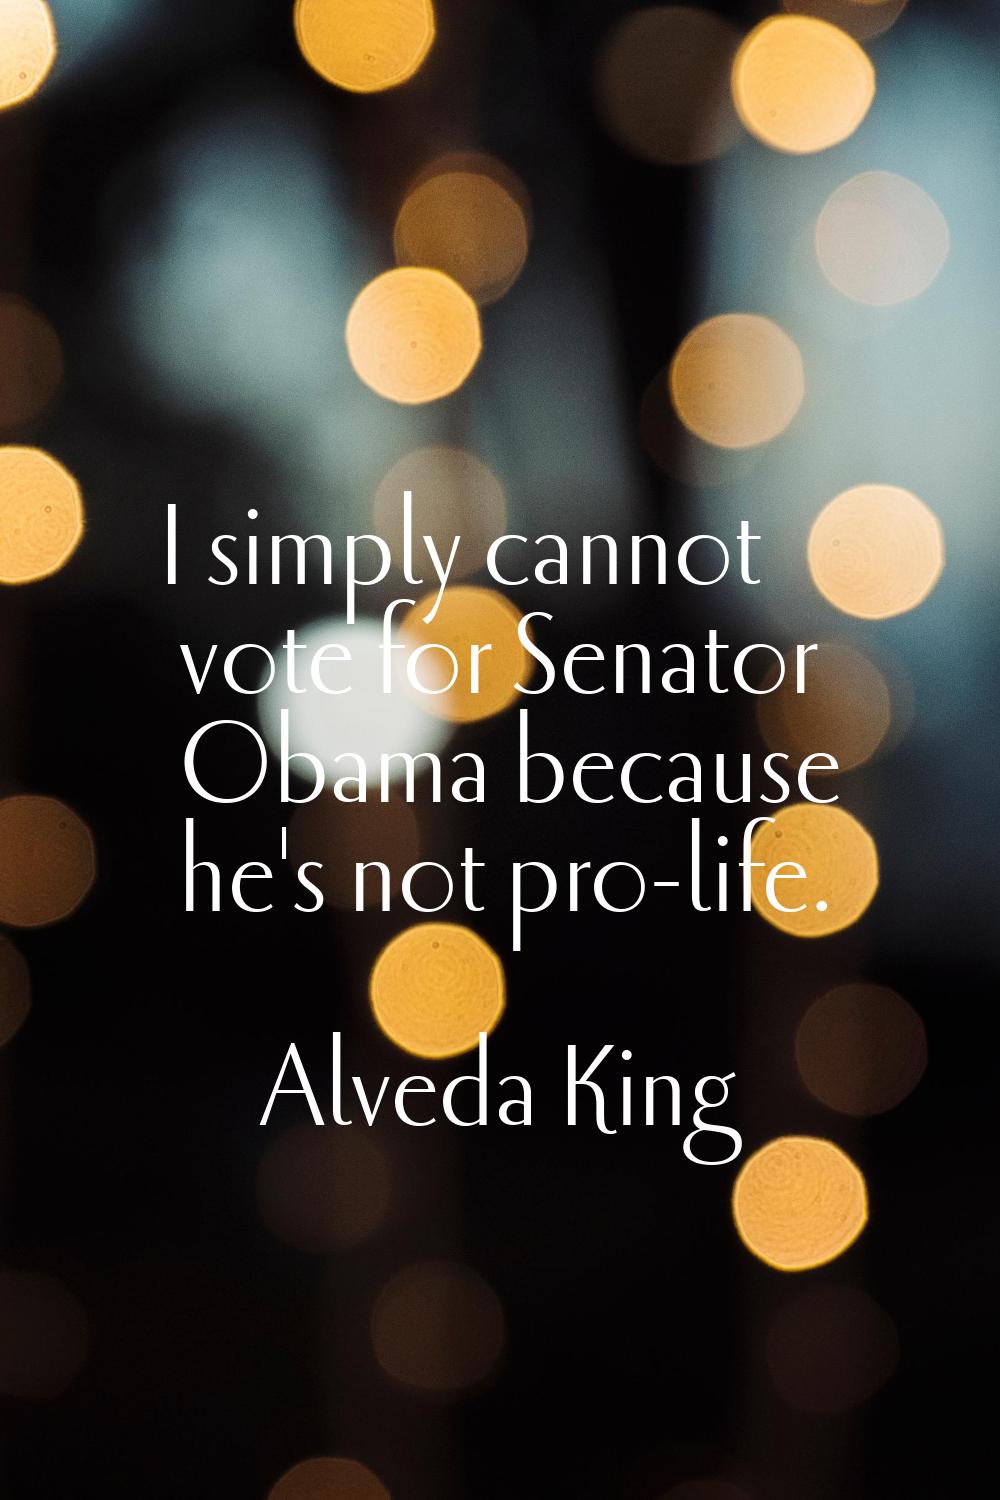 I simply cannot vote for Senator Obama because he's not pro-life.